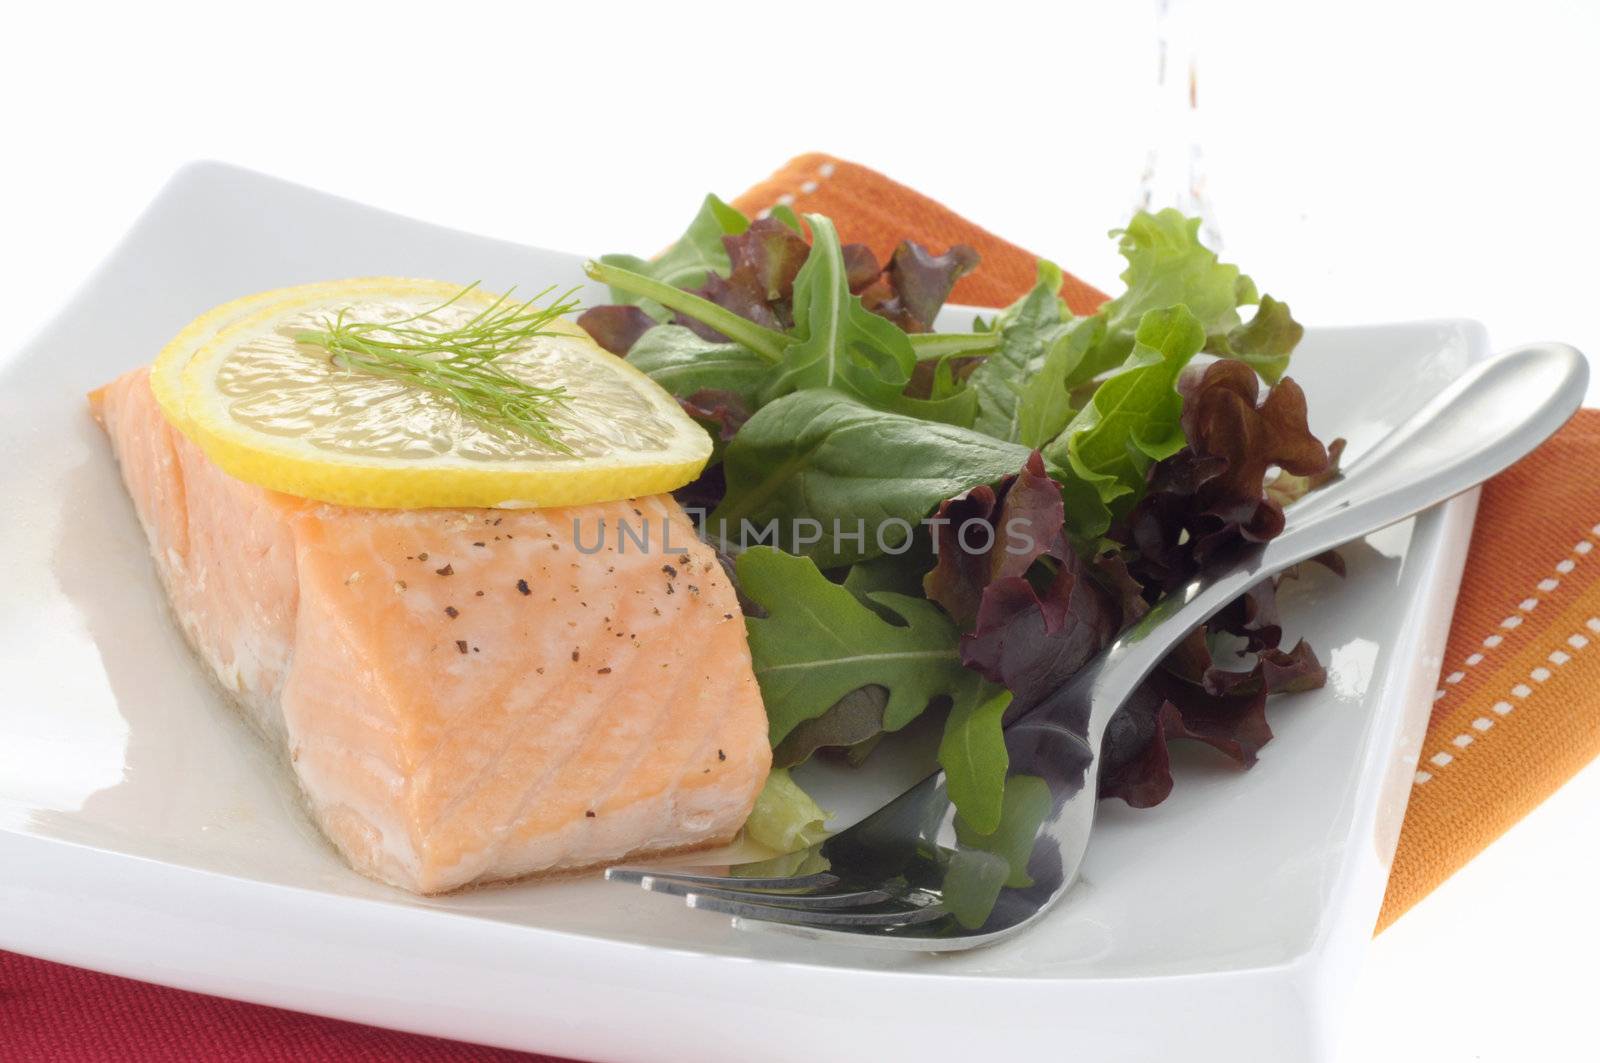 Delicious poached salmon served with greens and lemon.